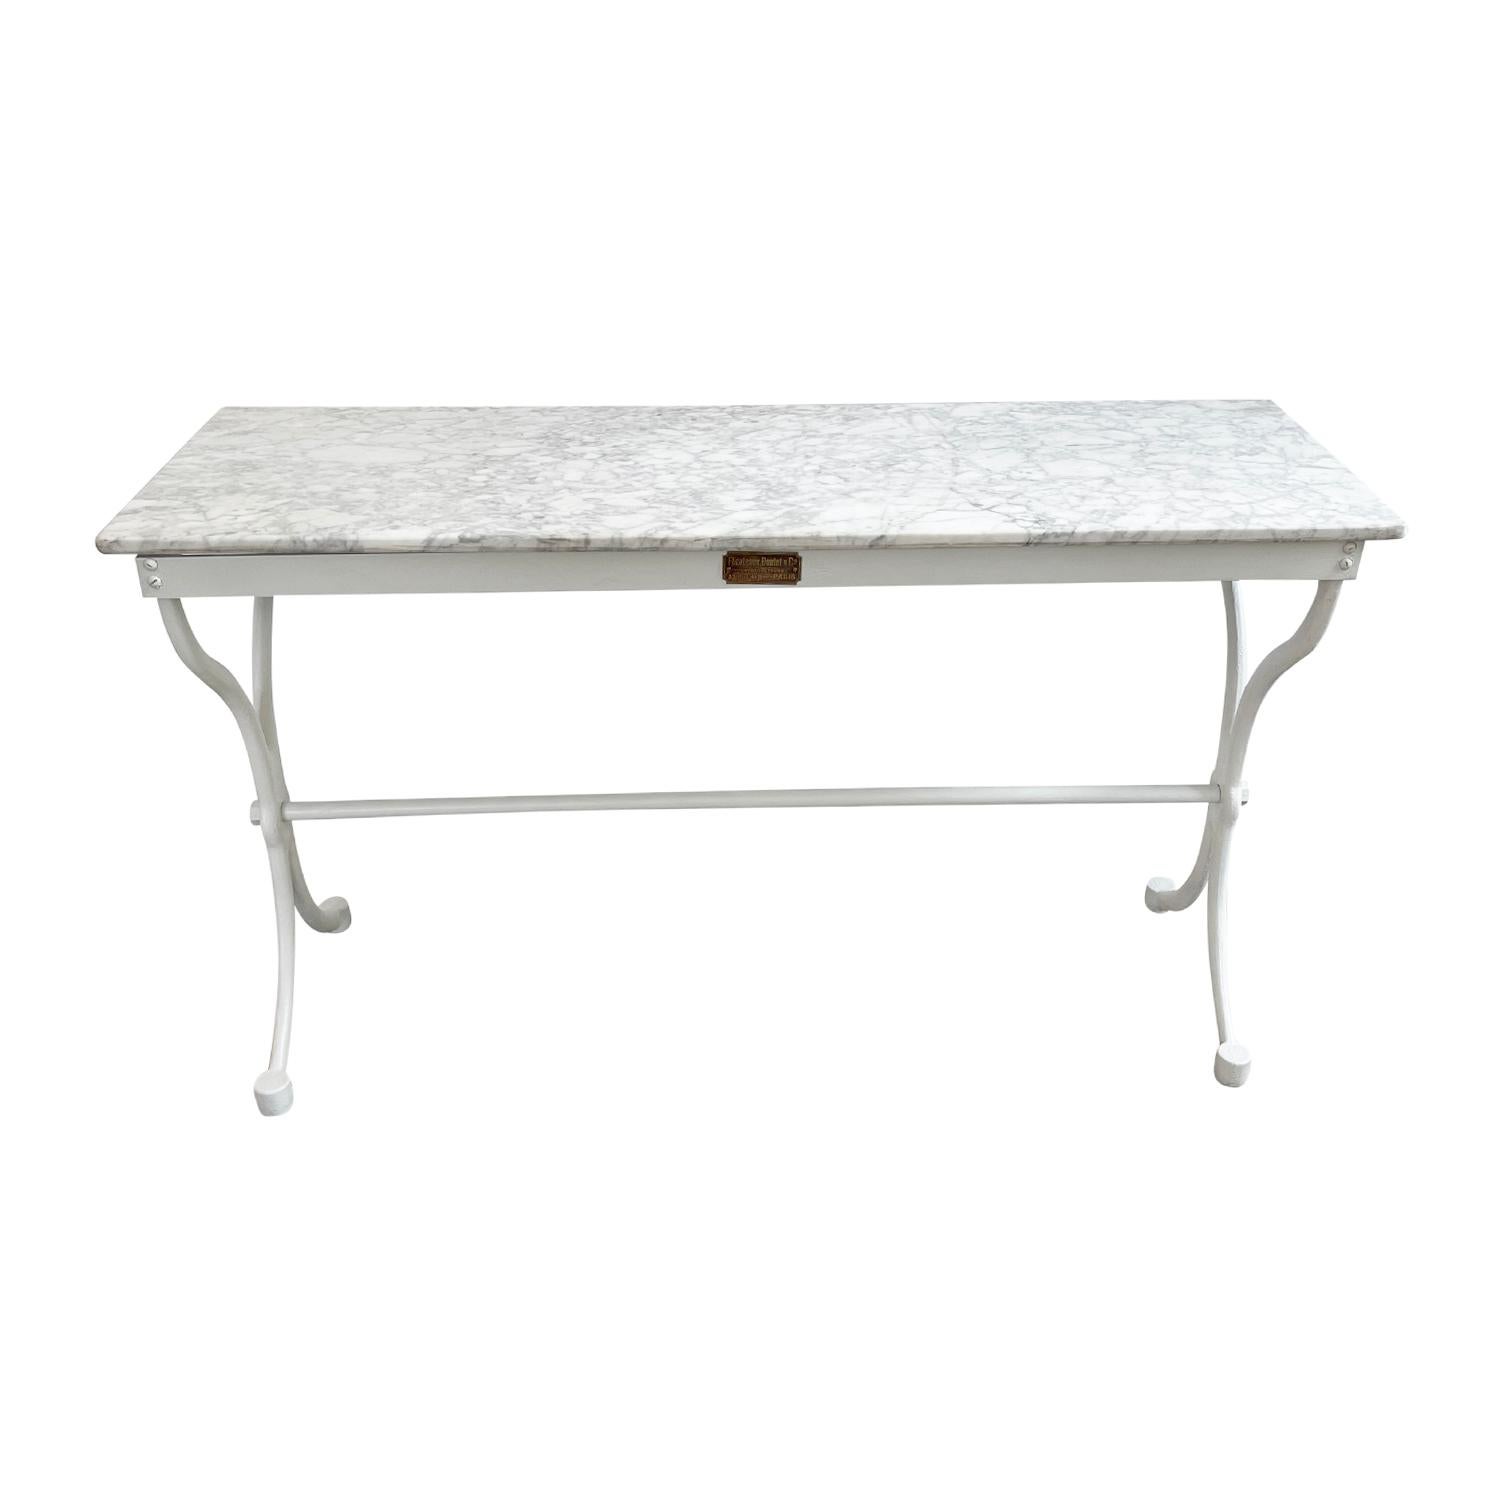 Cast 19th Century White Carrara Marble Top Console Table, French Iron Side Table